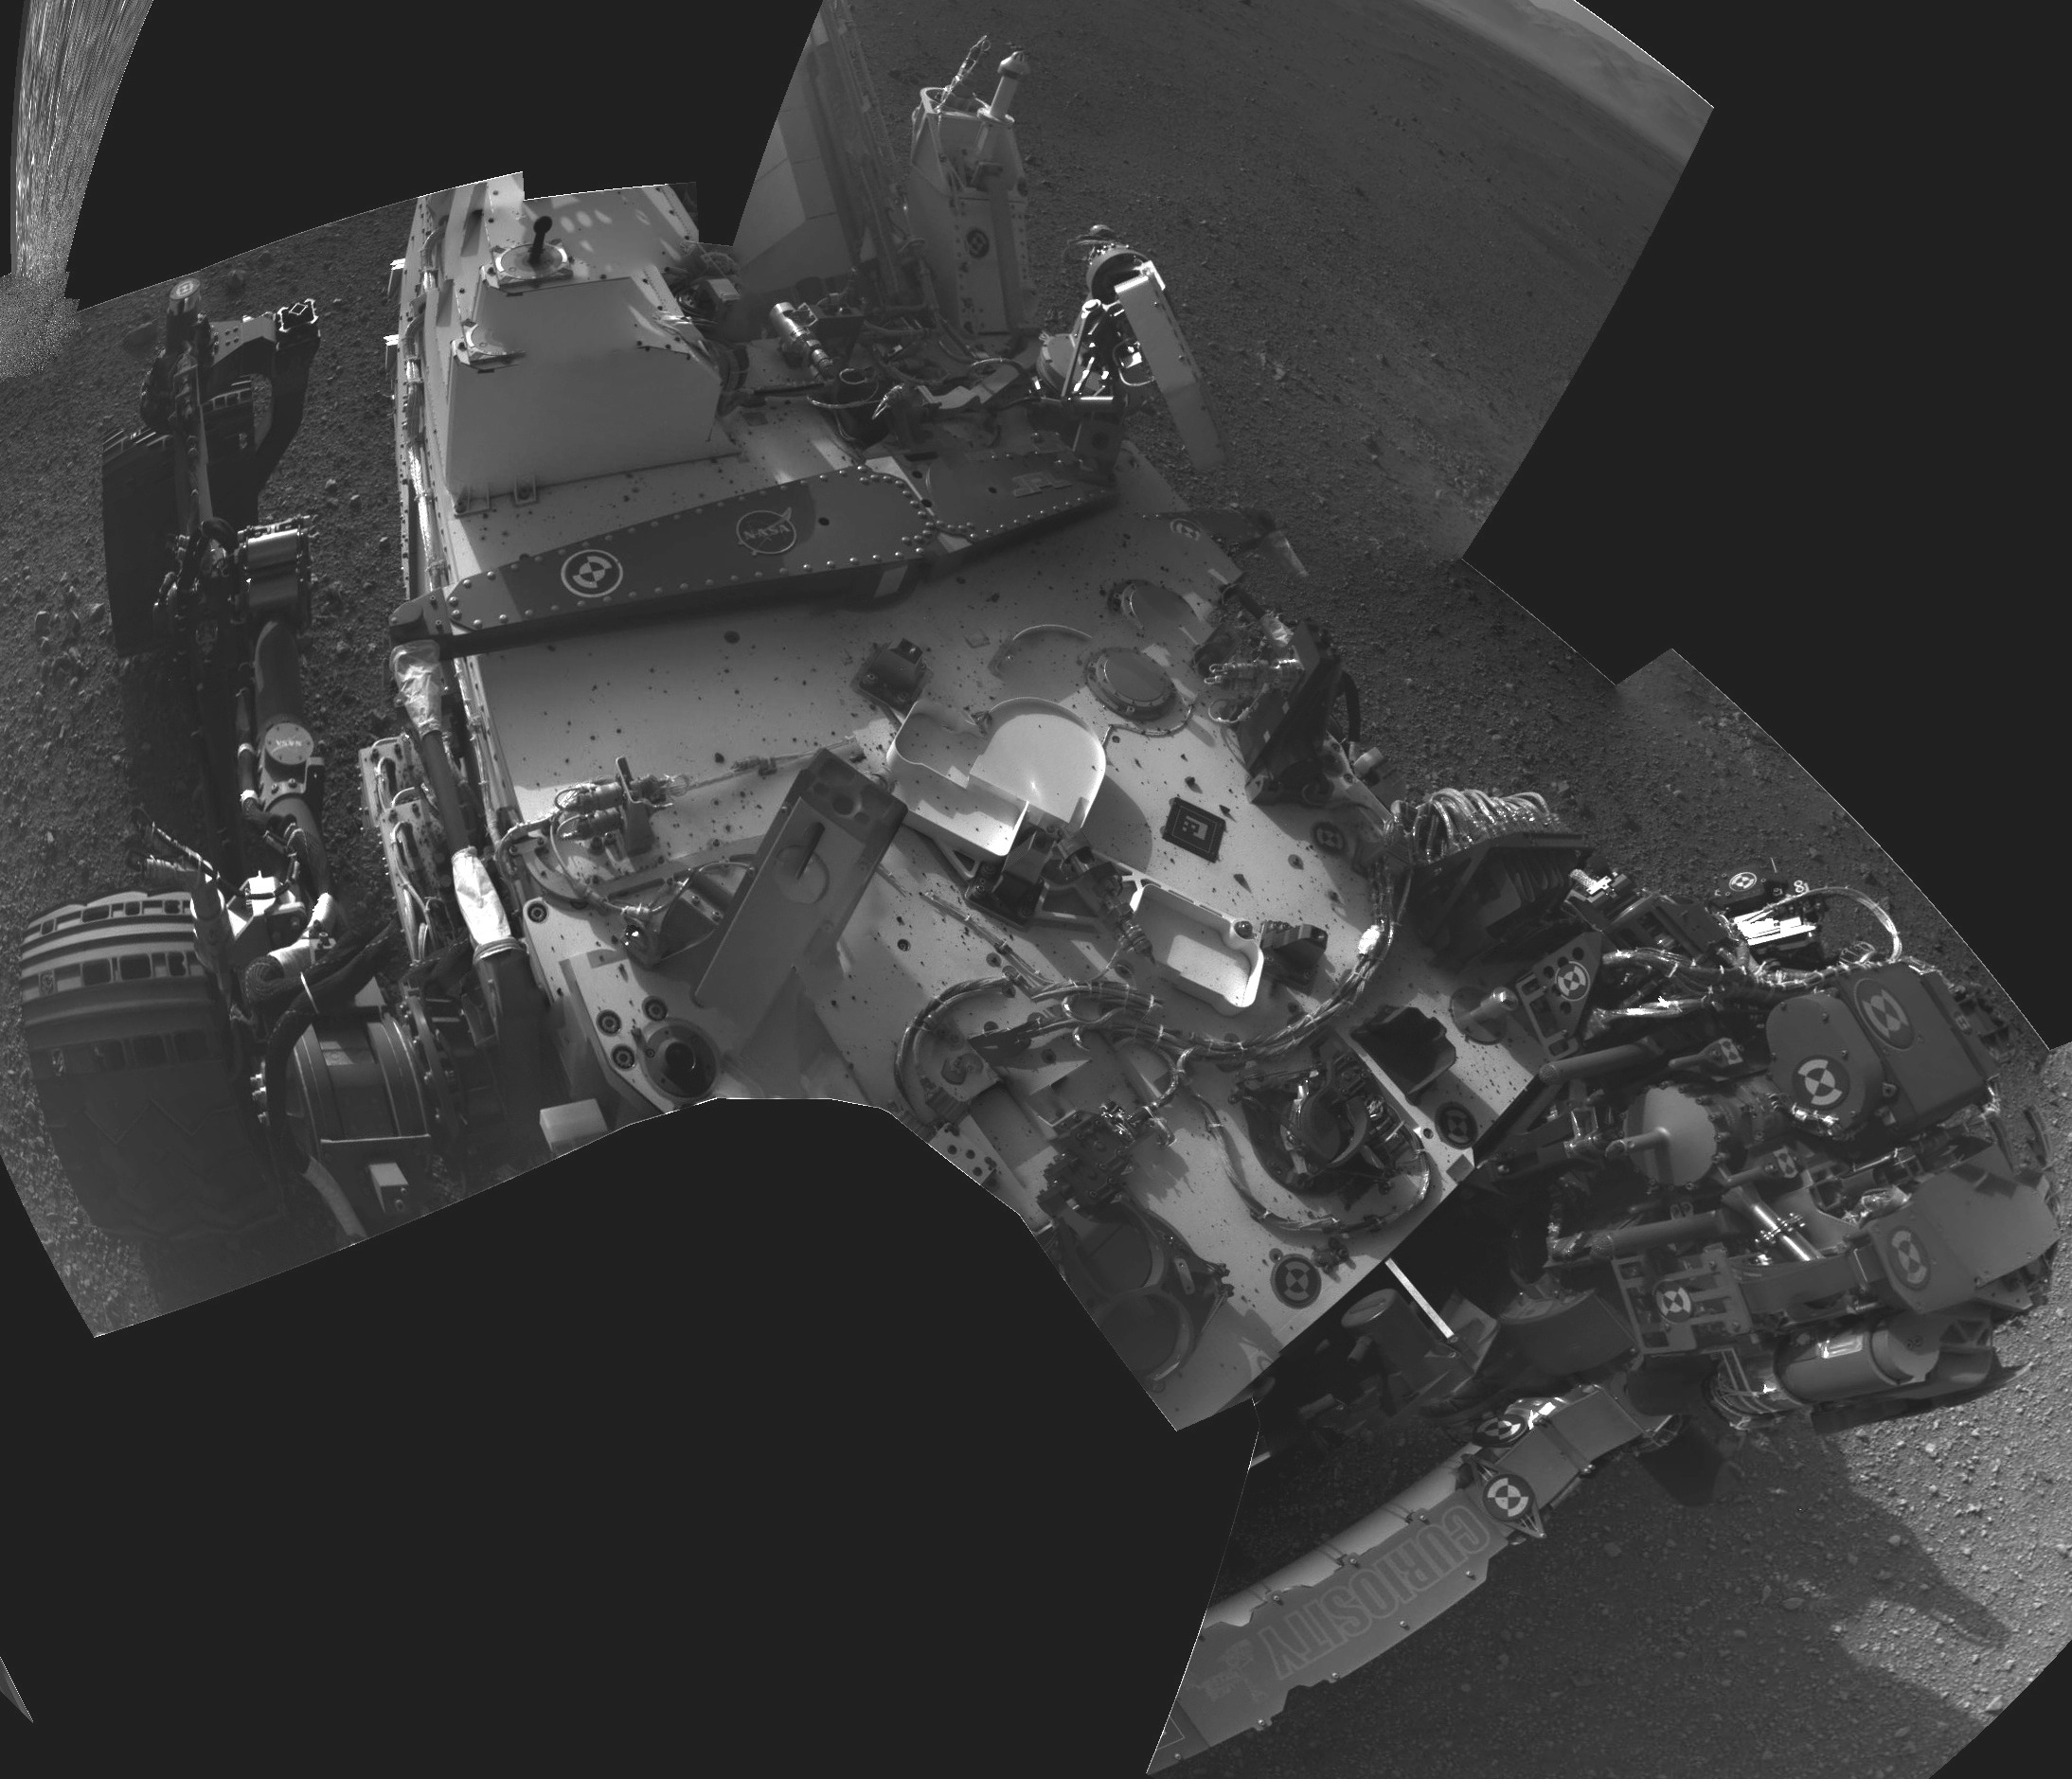 Mars Rover Curiosity's Self Portrait made of multiple pictures laced together.